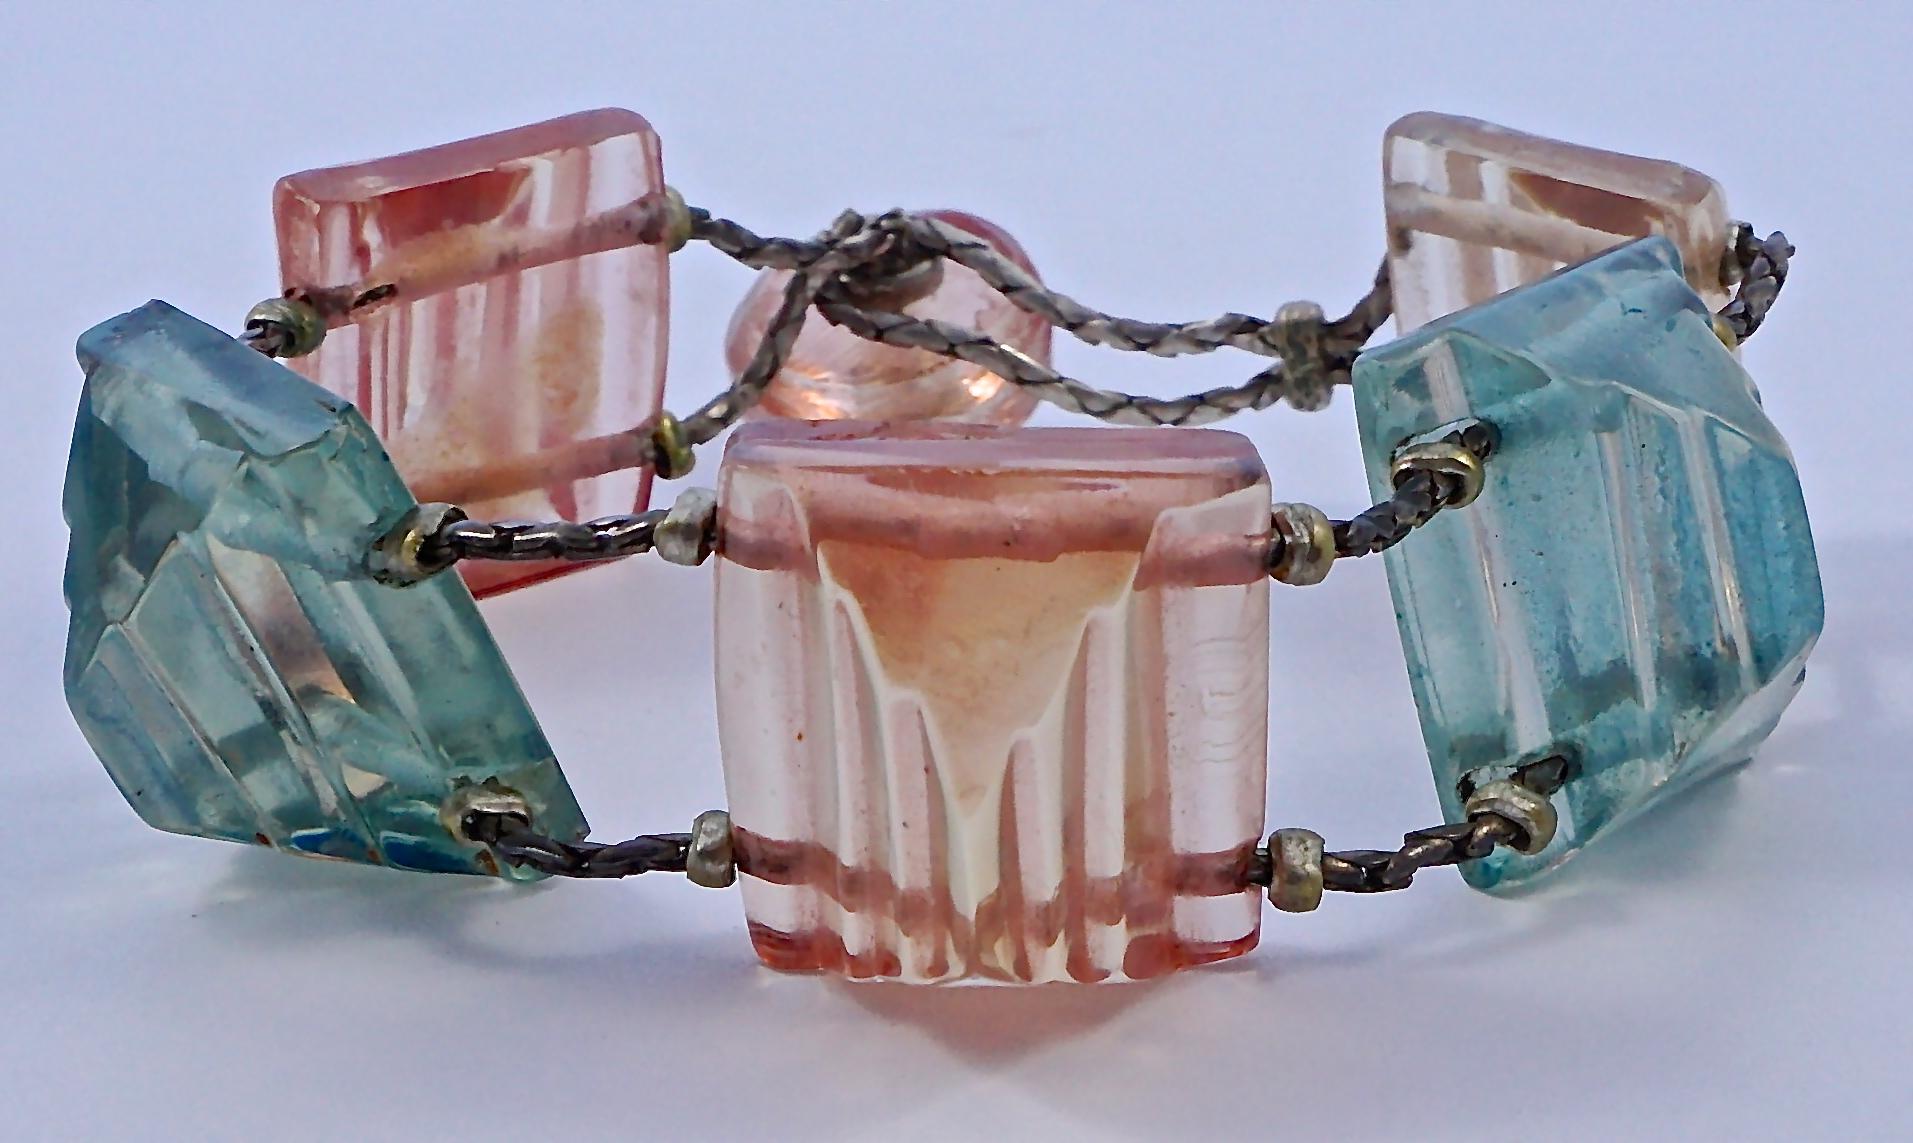 Art Deco bracelet featuring wonderful shell pink and mid blue early plastic beads, with a loop and bead fastening. The beads are threaded on to silver tone chain decorated with small metal beads. Measuring length 19cm / 7.48 inches not including the